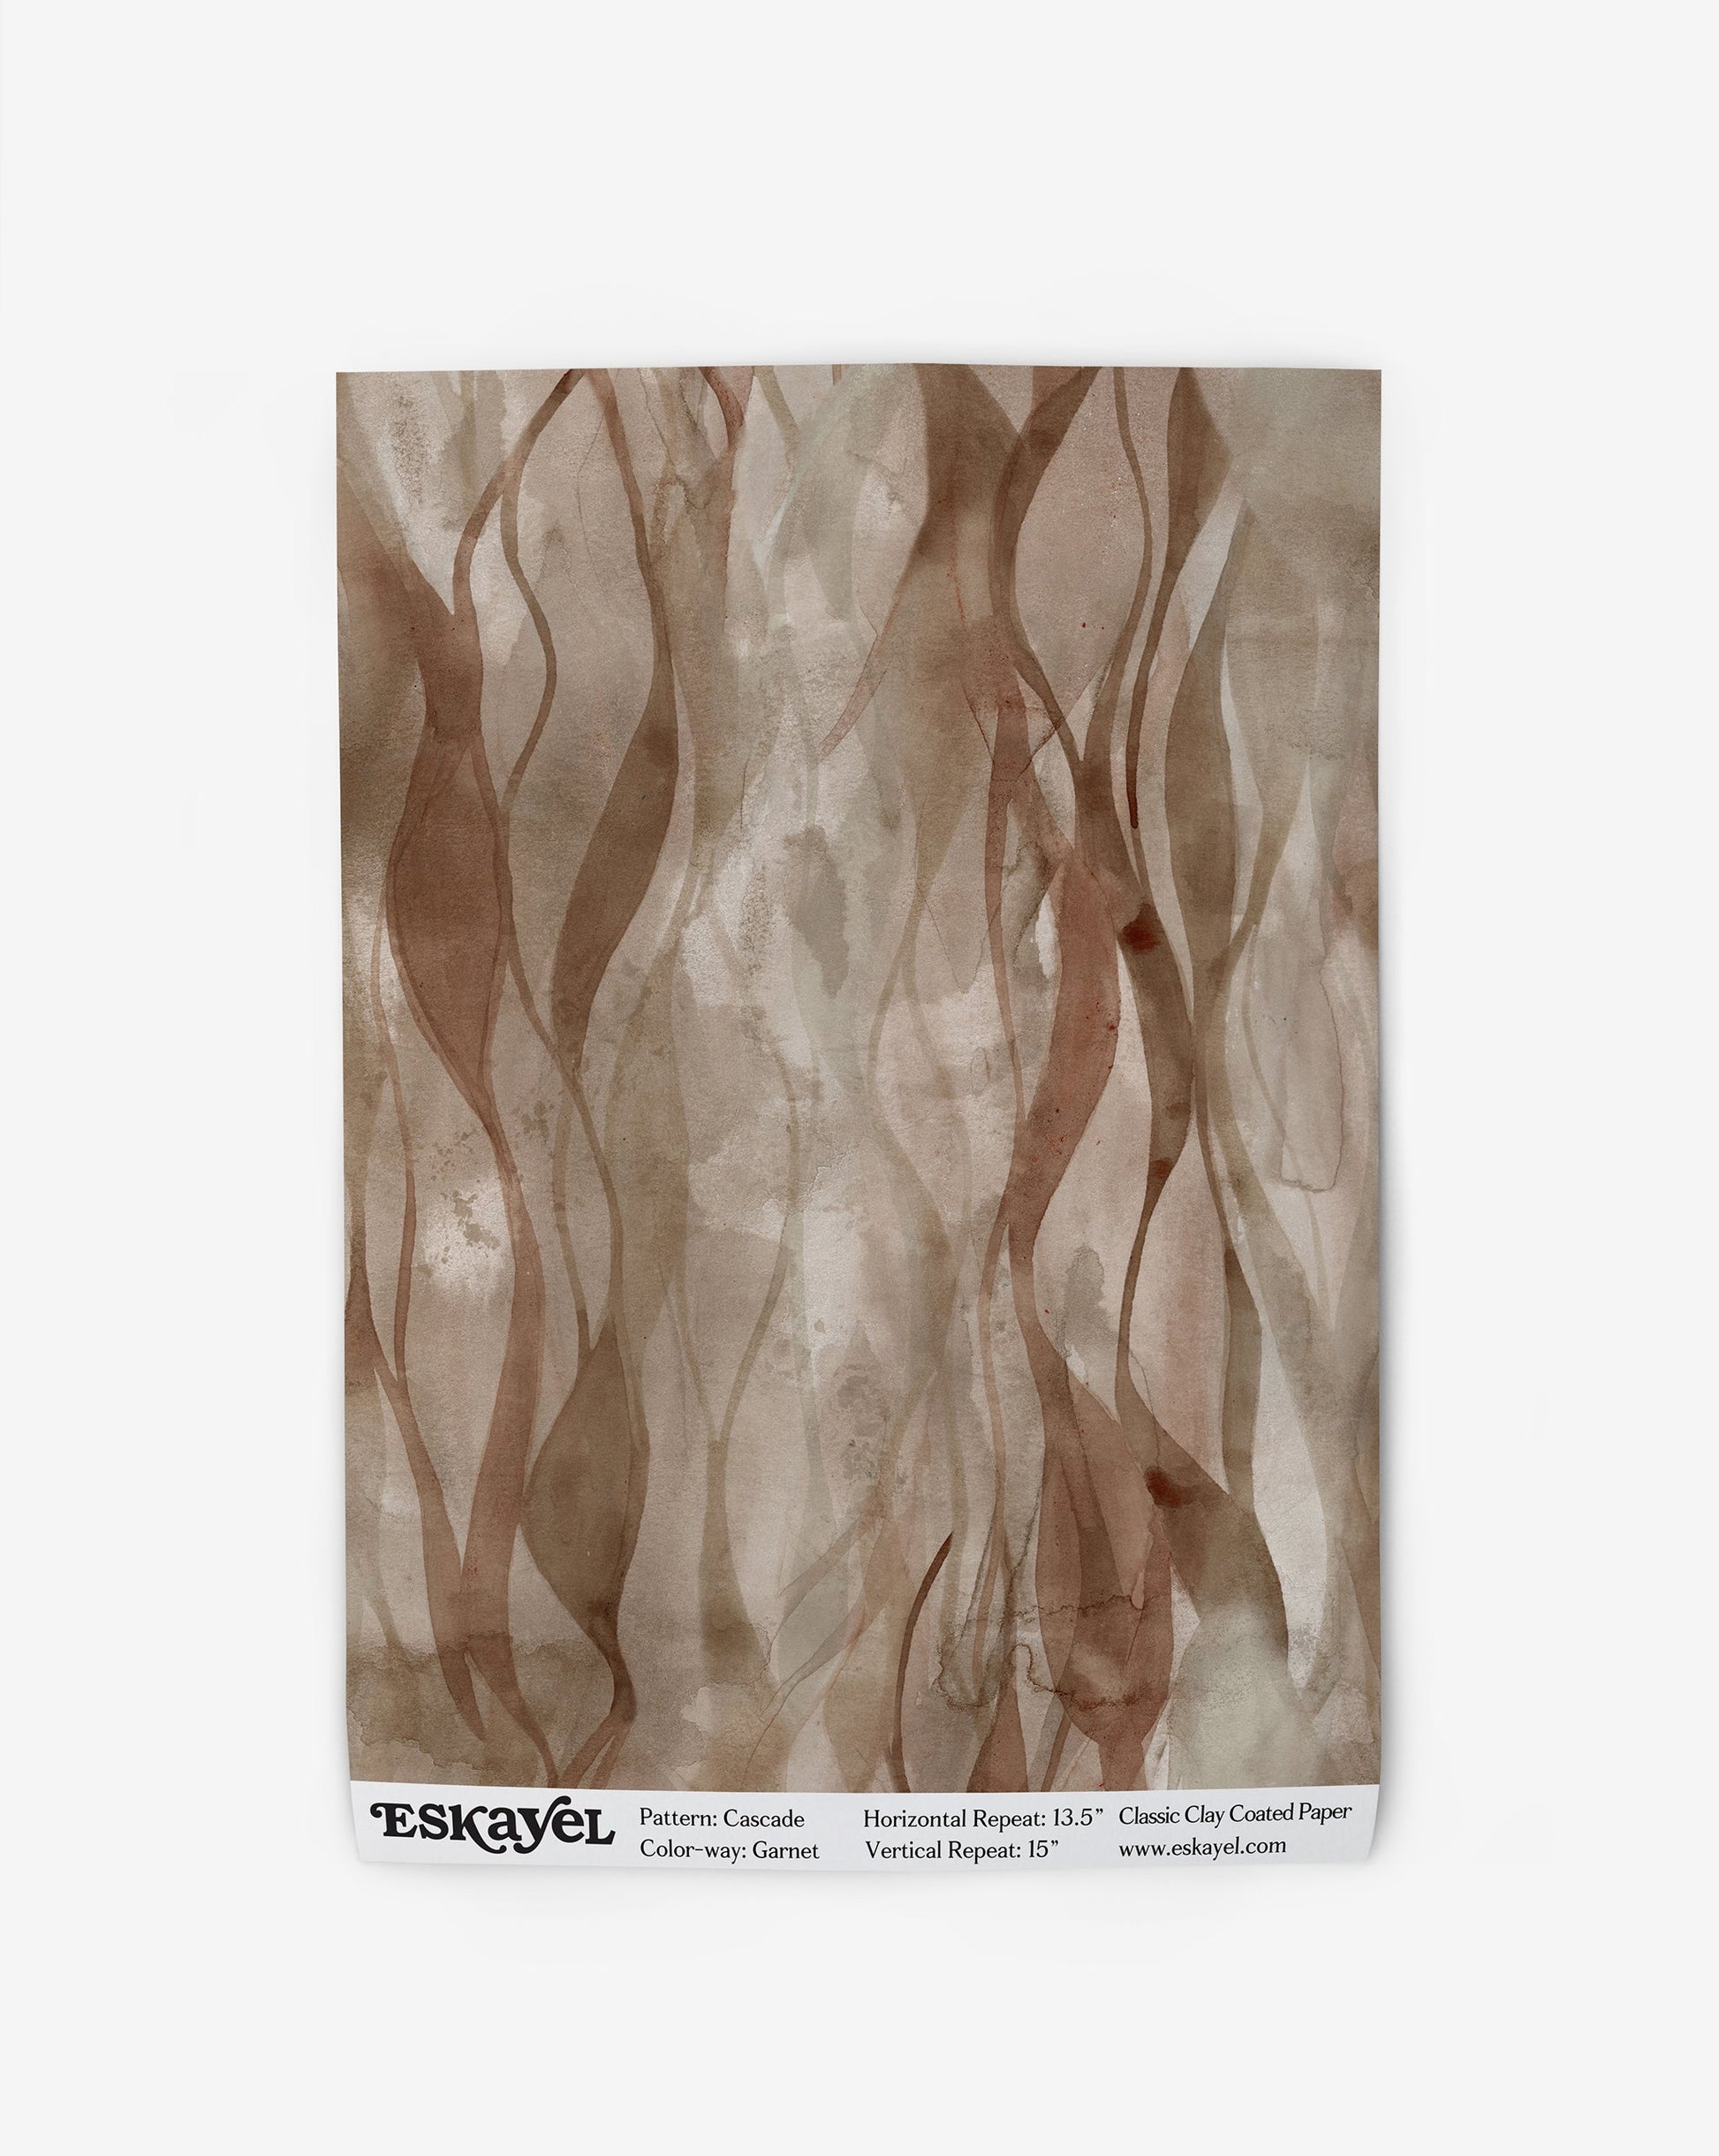 Cascade Wallpaper Sample in the color way garnet in shades of brown and beige.